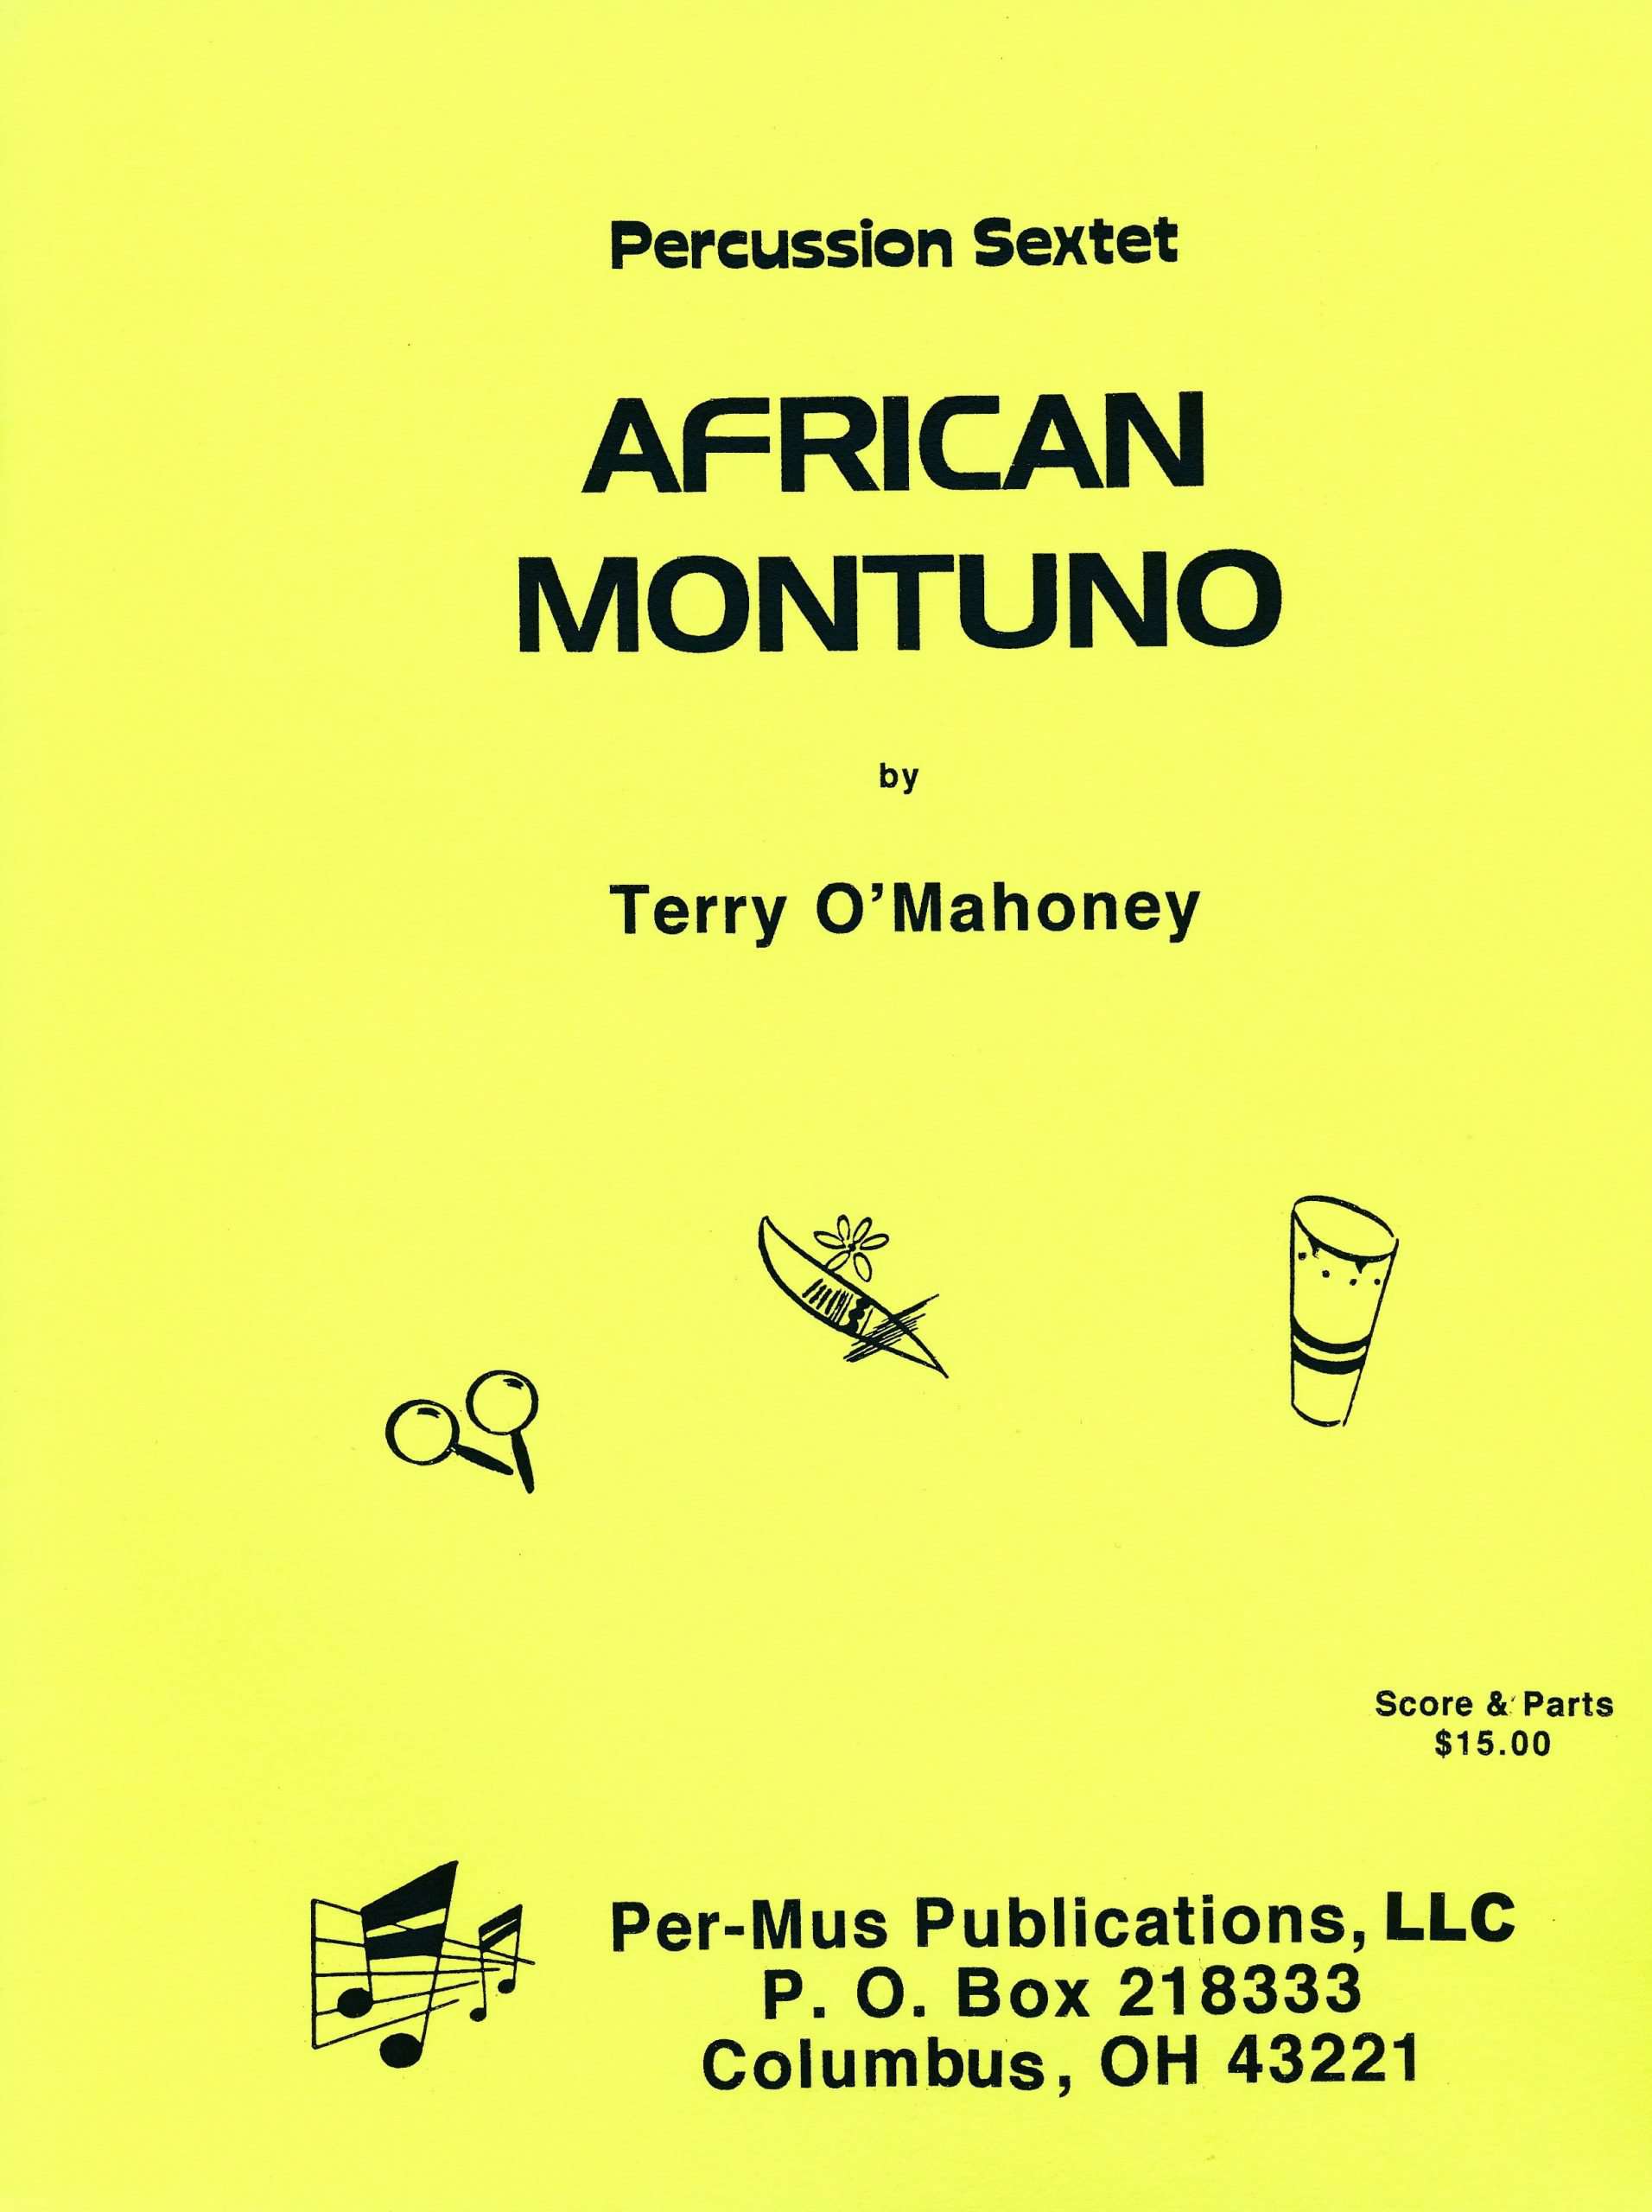 African Montuno by Terry O'Mahoney